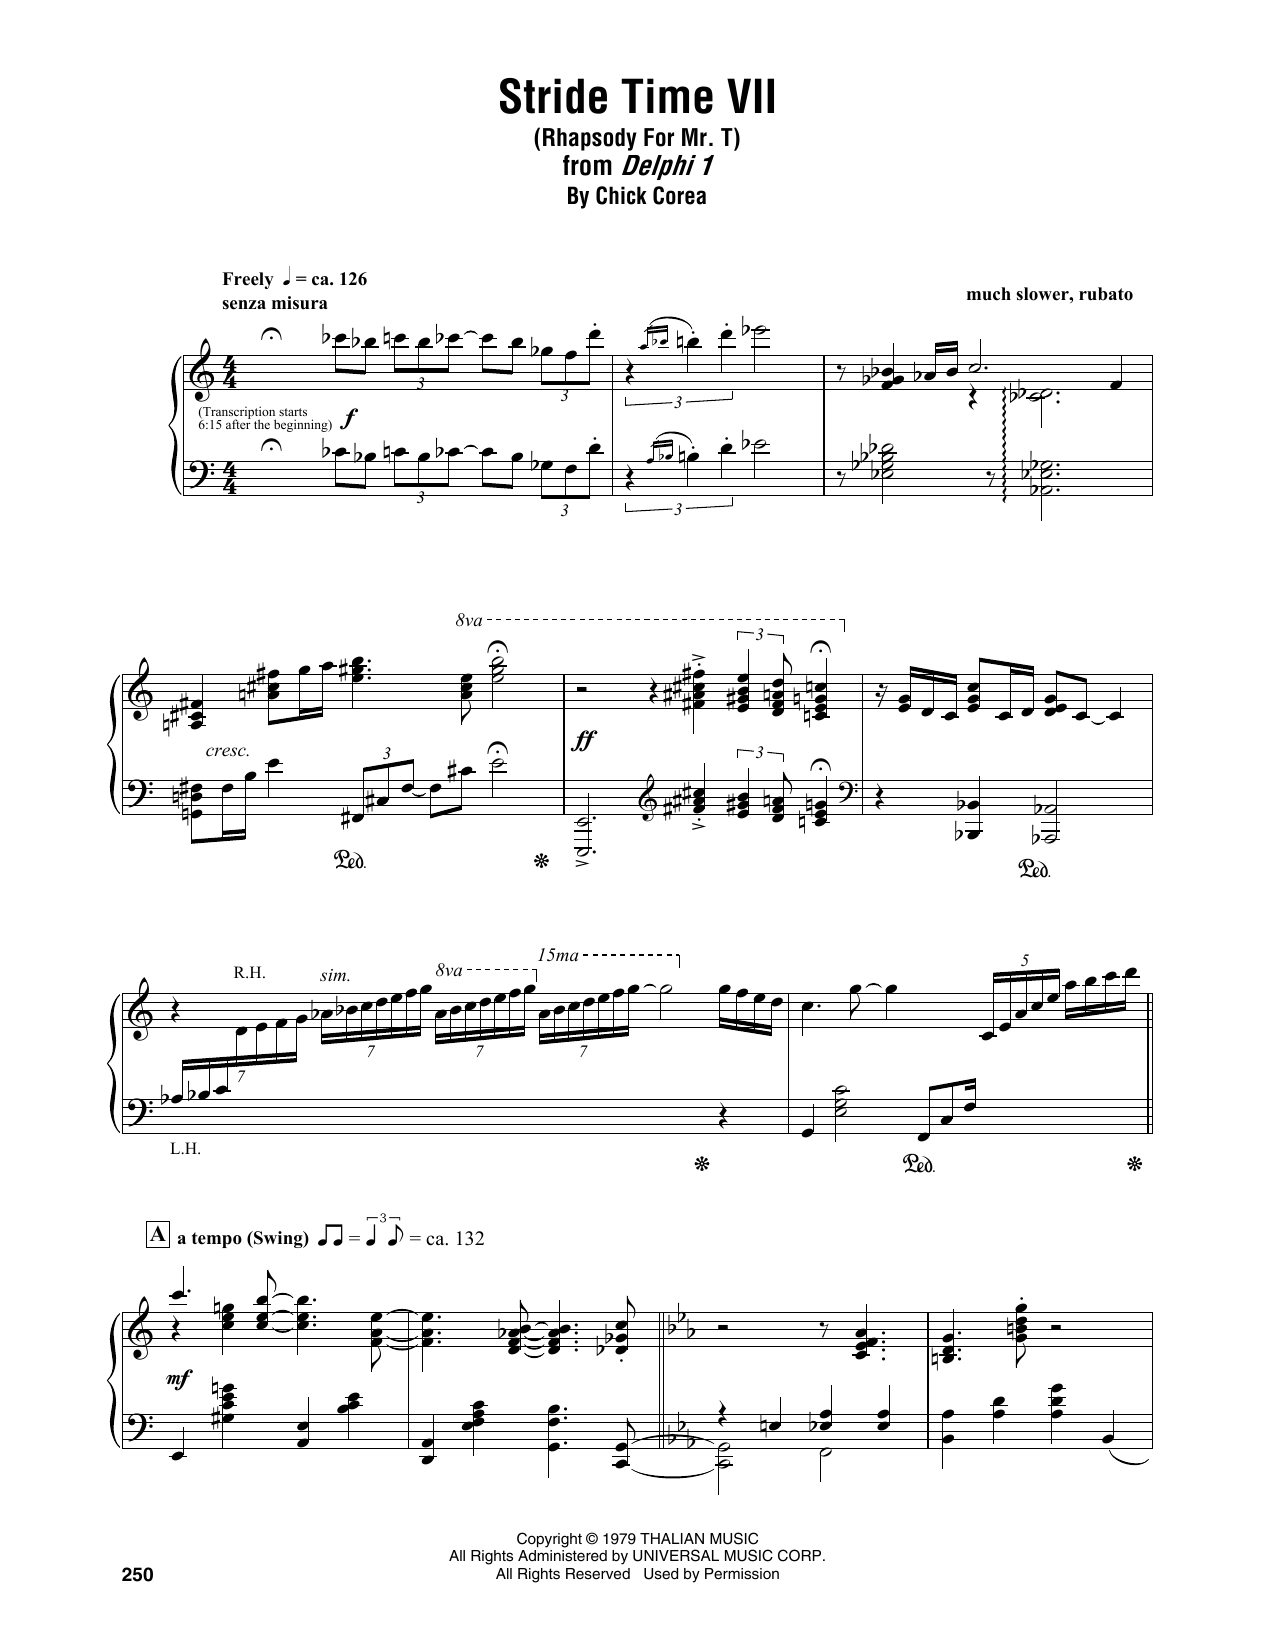 Download Chick Corea Stride Time VII (Rhapsody For Mr. T) Sheet Music